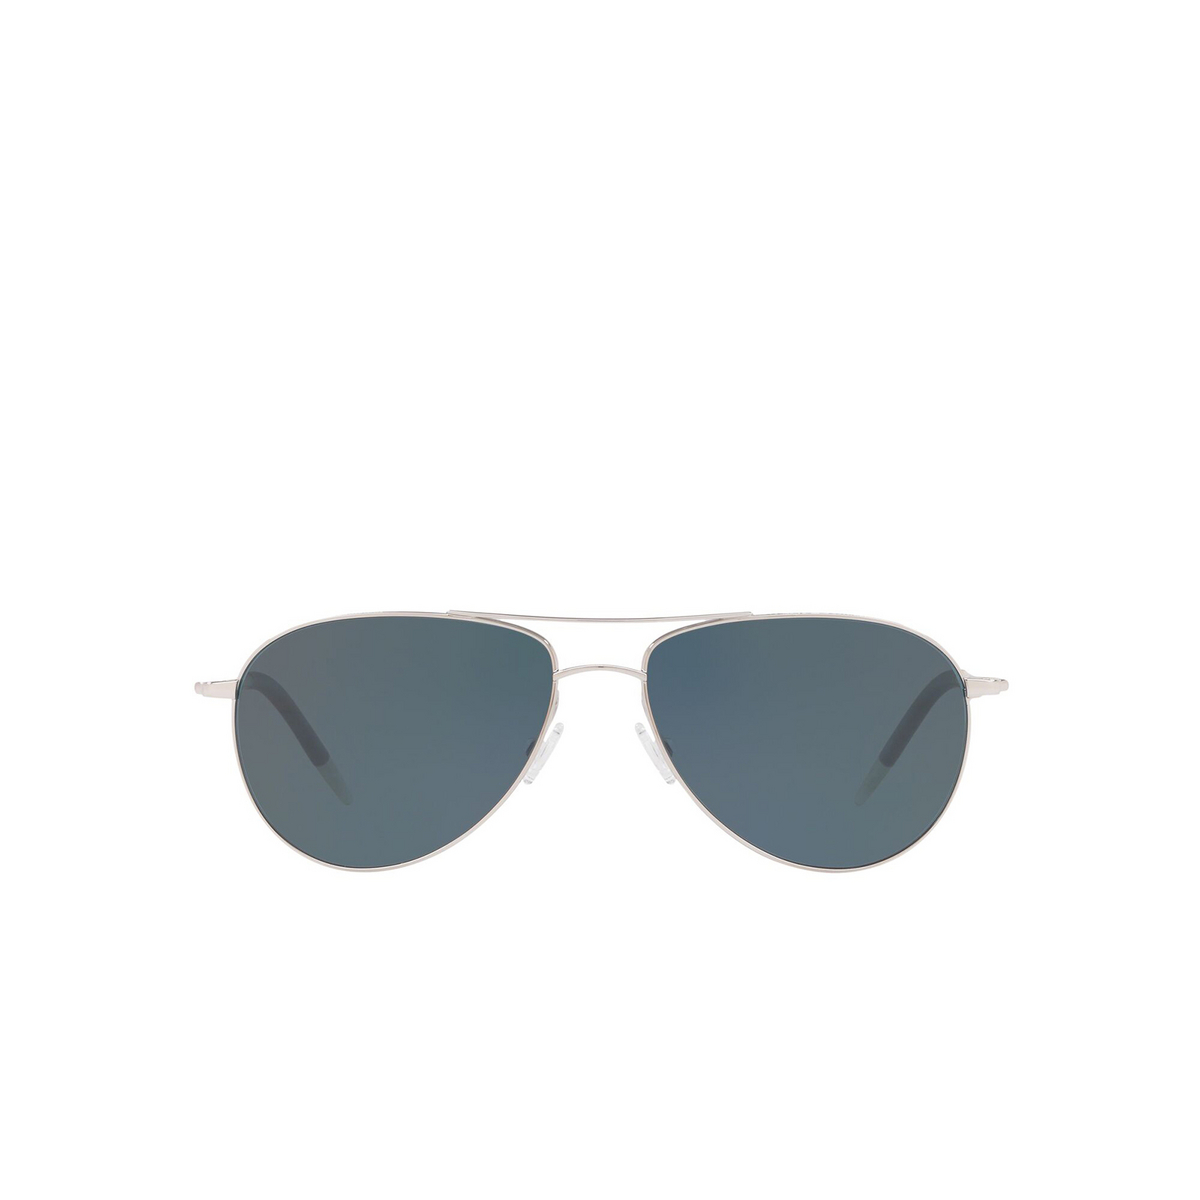 Oliver Peoples® Aviator Sunglasses: Benedict OV1002S color Silver 50363R - front view.